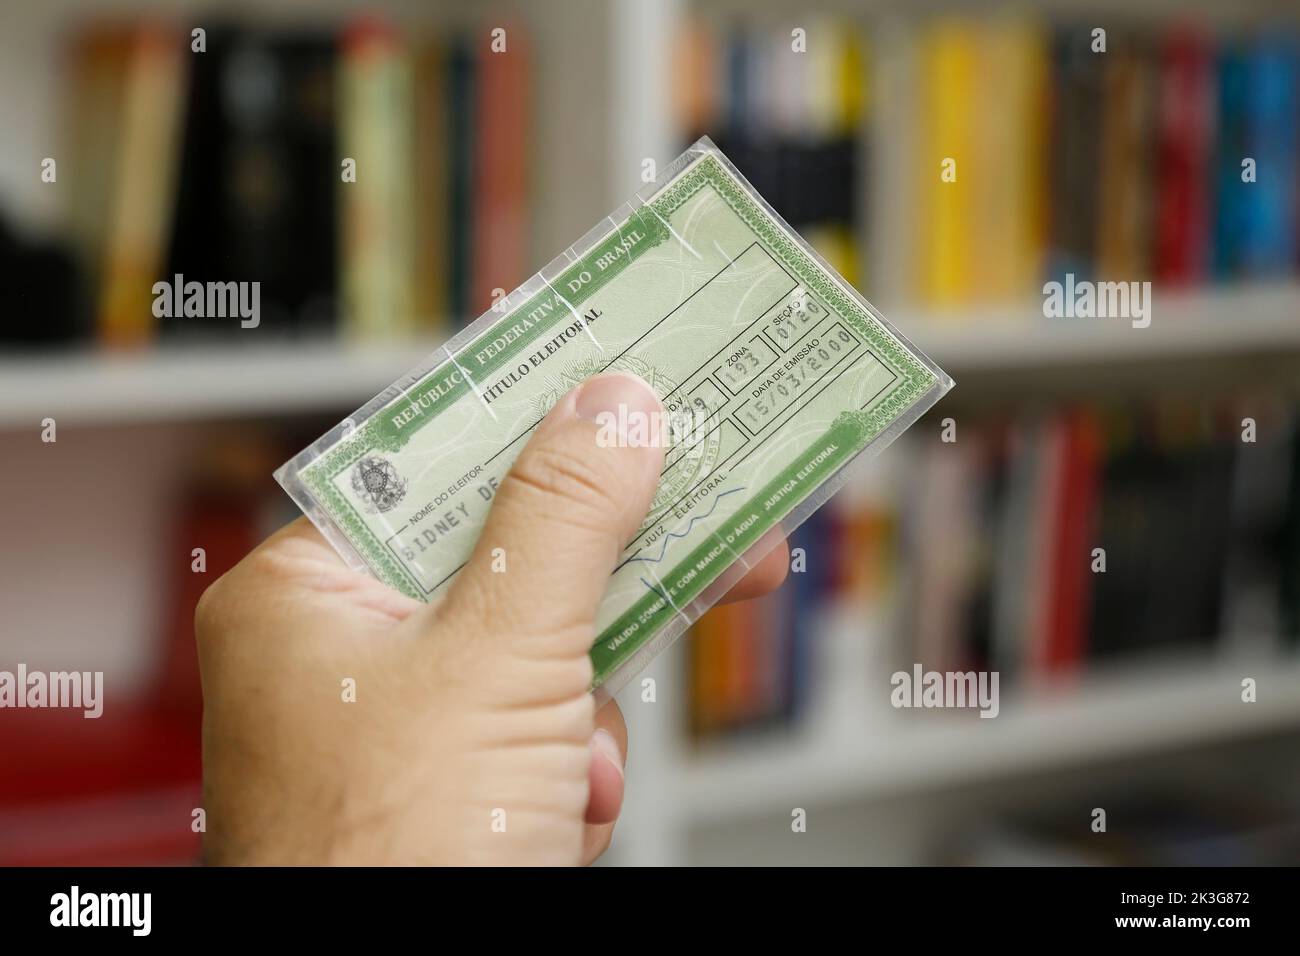 Minas Gerais, Brazil - September 25, 2022: hand holding an electoral card, document used to vote in Brazil Stock Photo